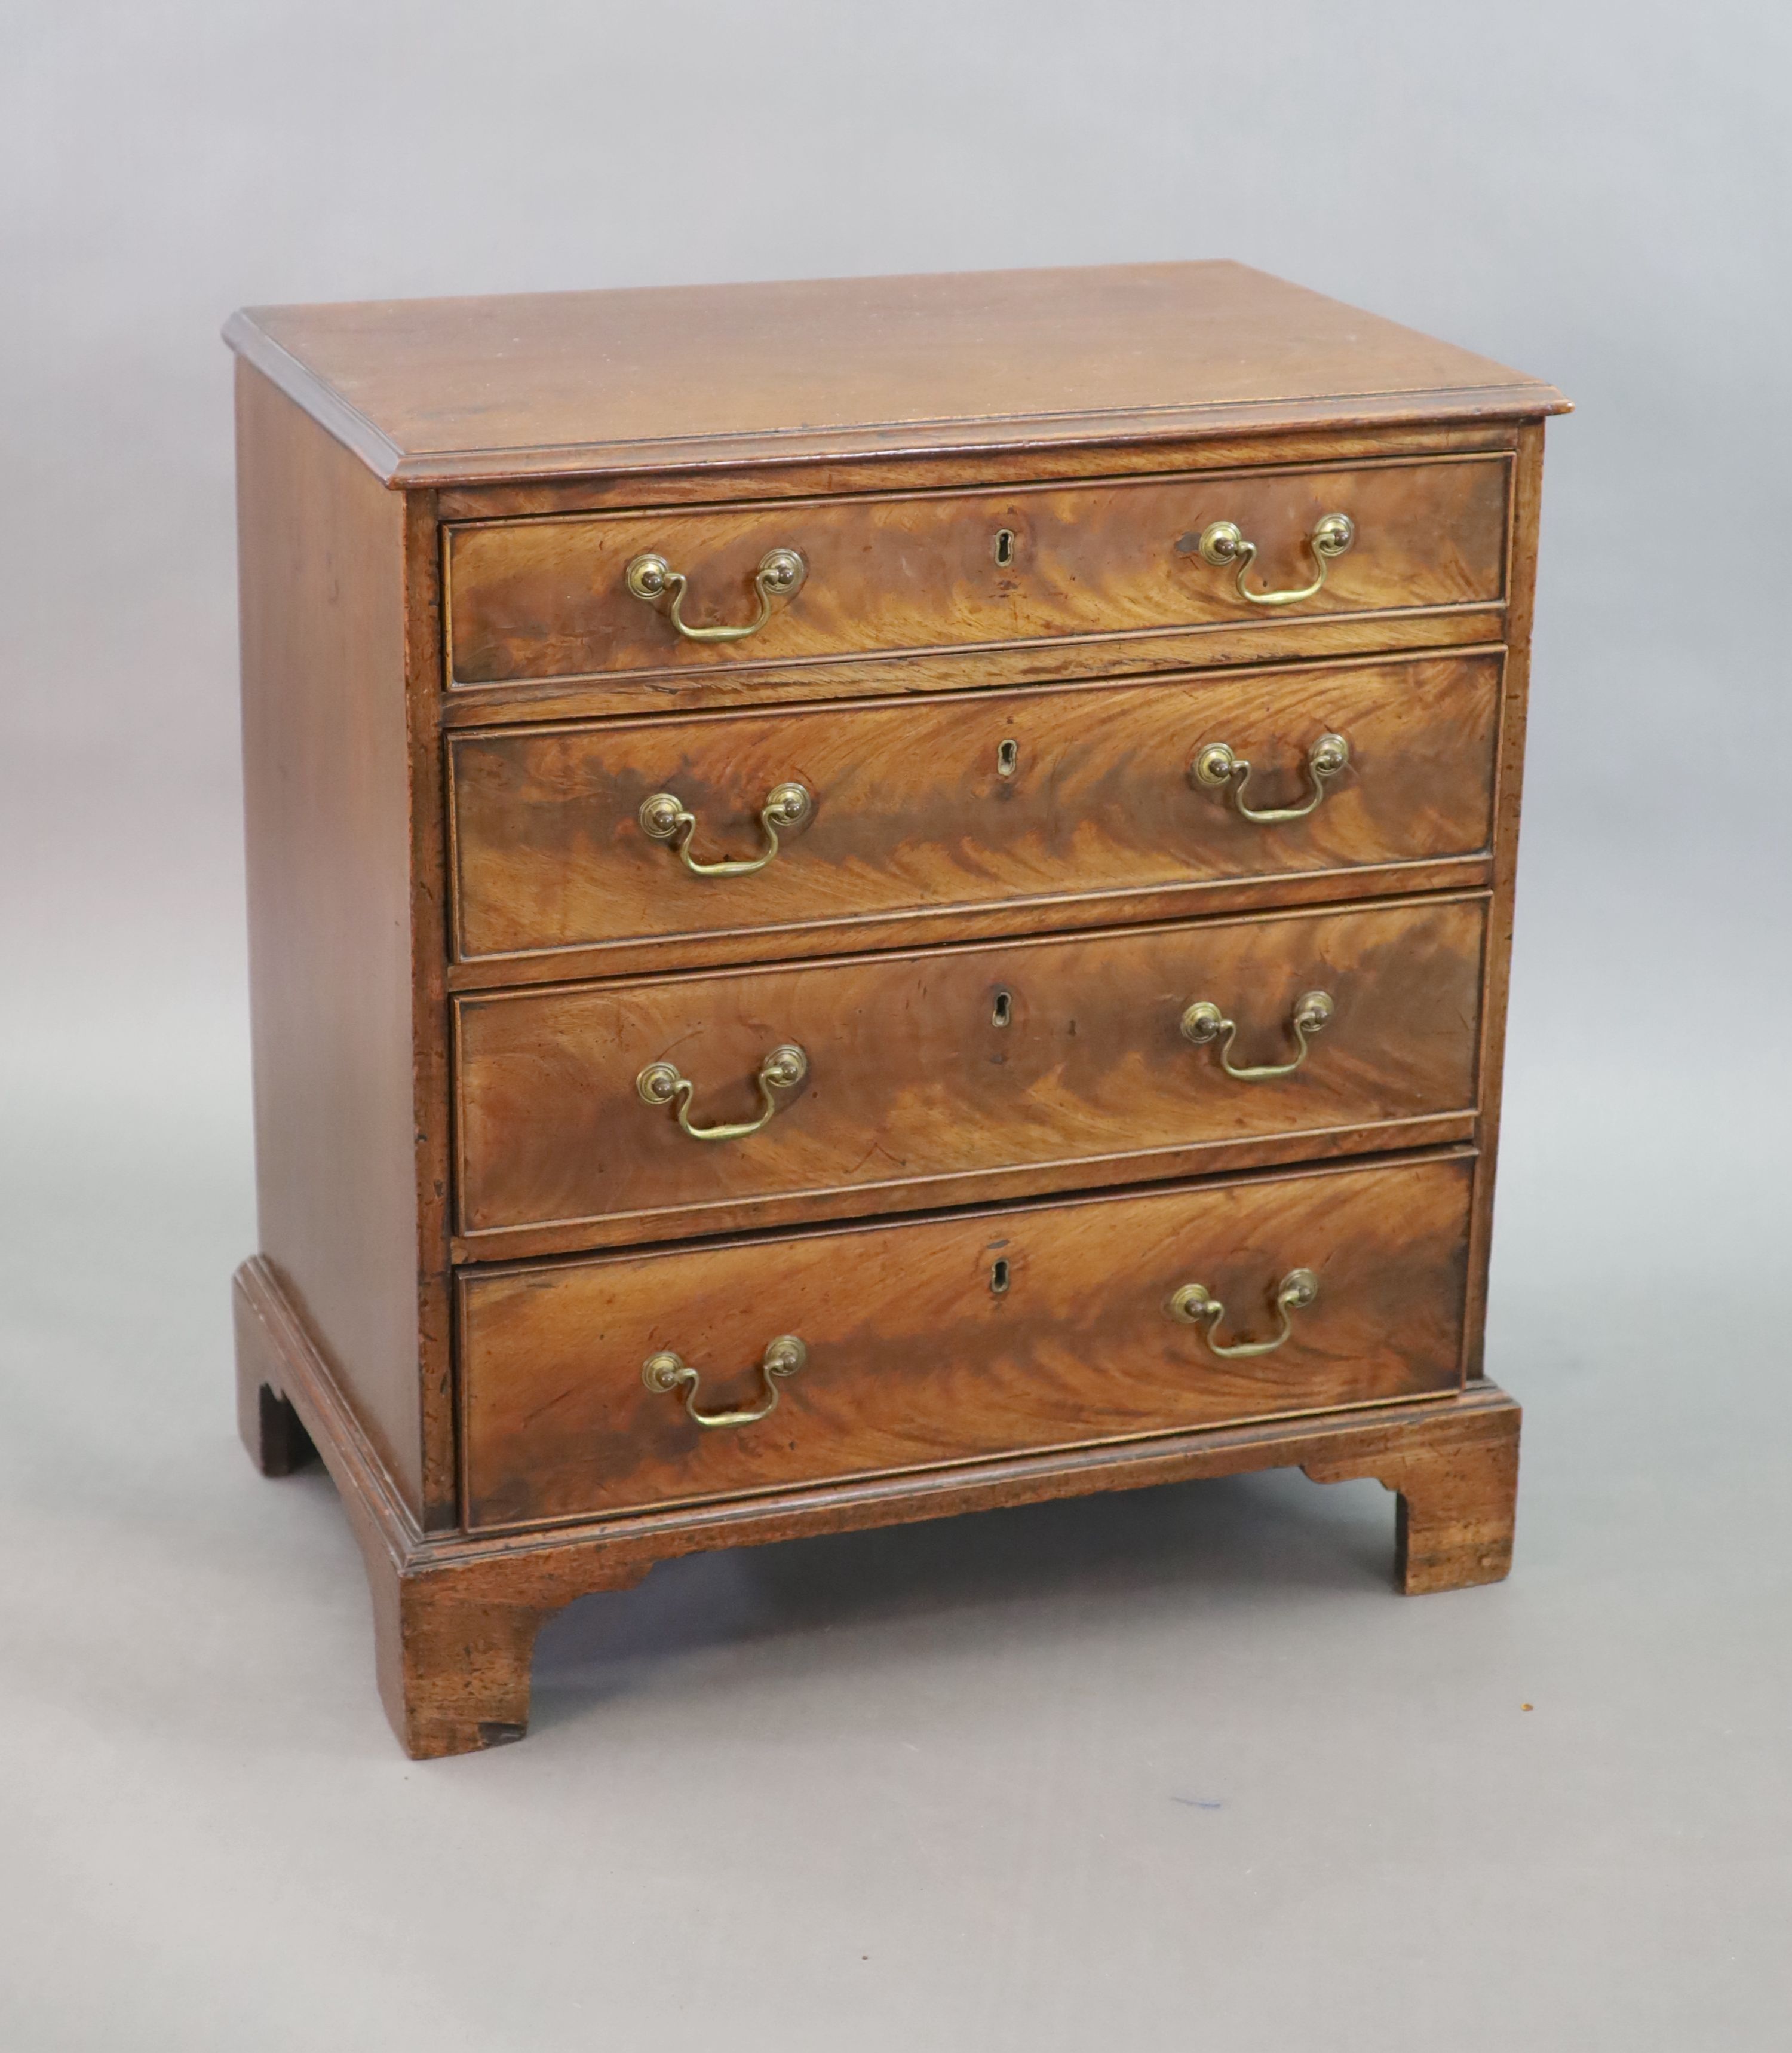 An unusually small George III mahogany chest of drawers, W.68cm D.45cm H.74cm